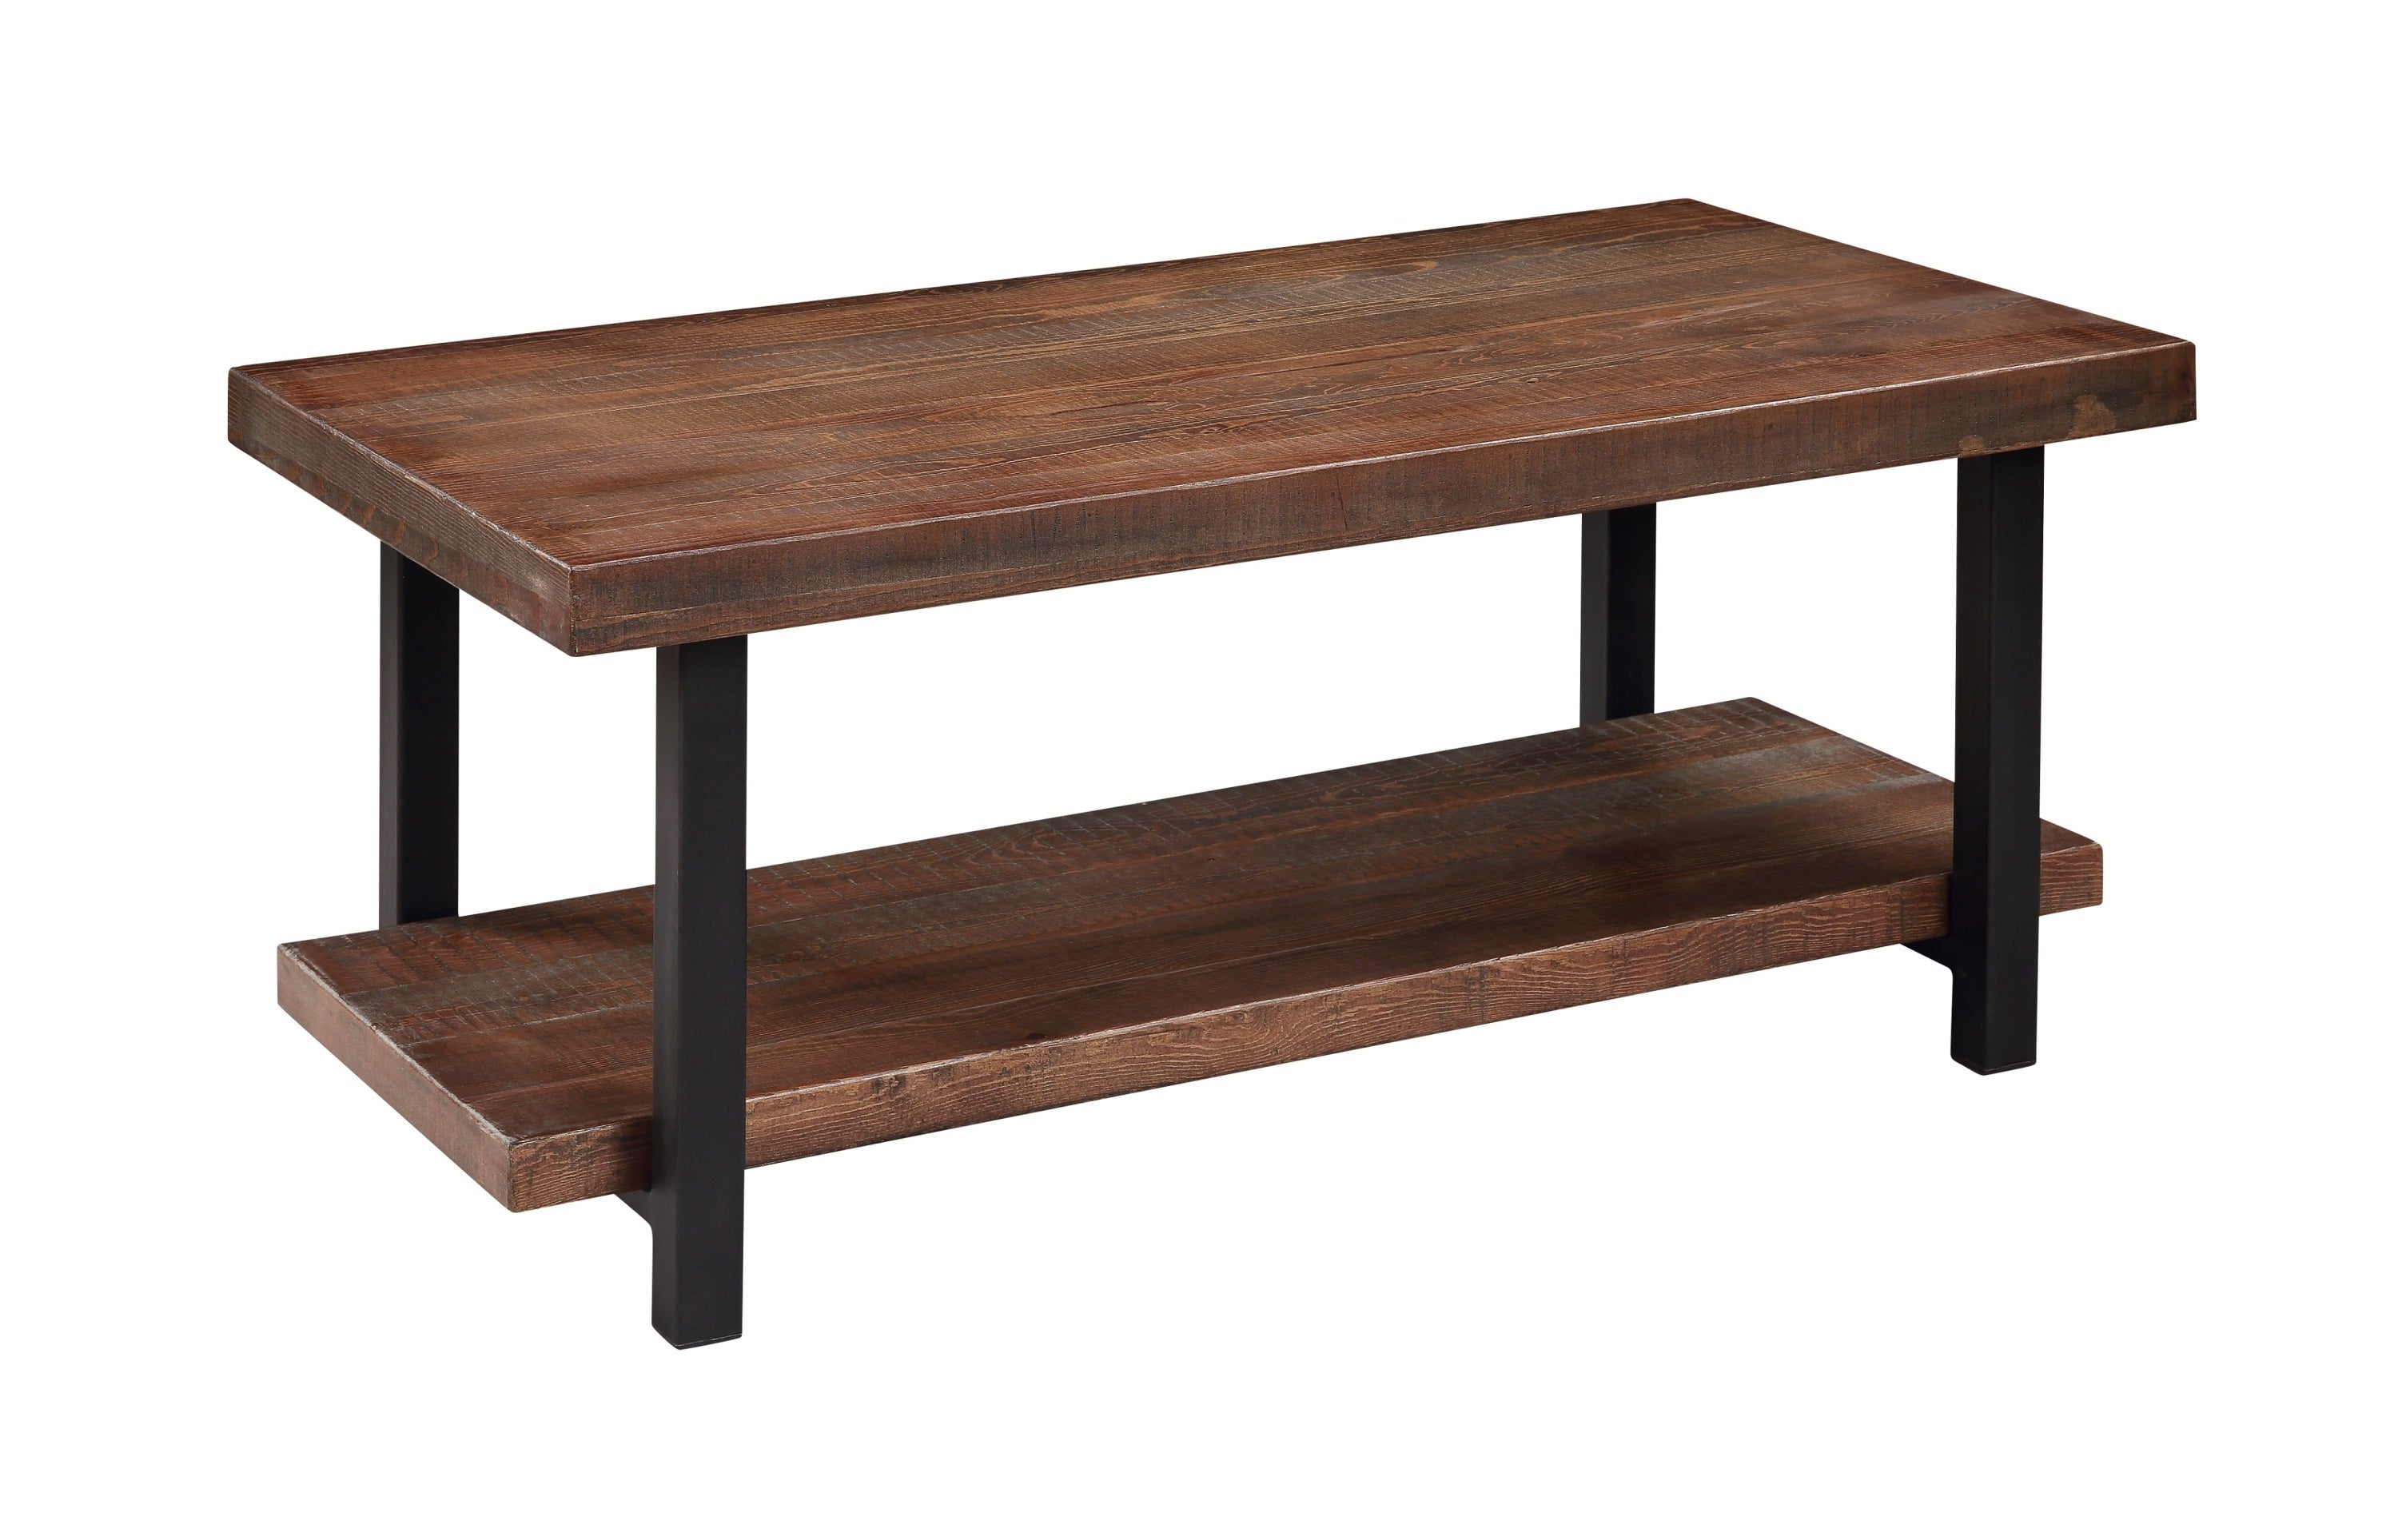 U_STYLE Idustrial Coffee Table Solid Wood + MDF and Iron Frame with Open Shelf